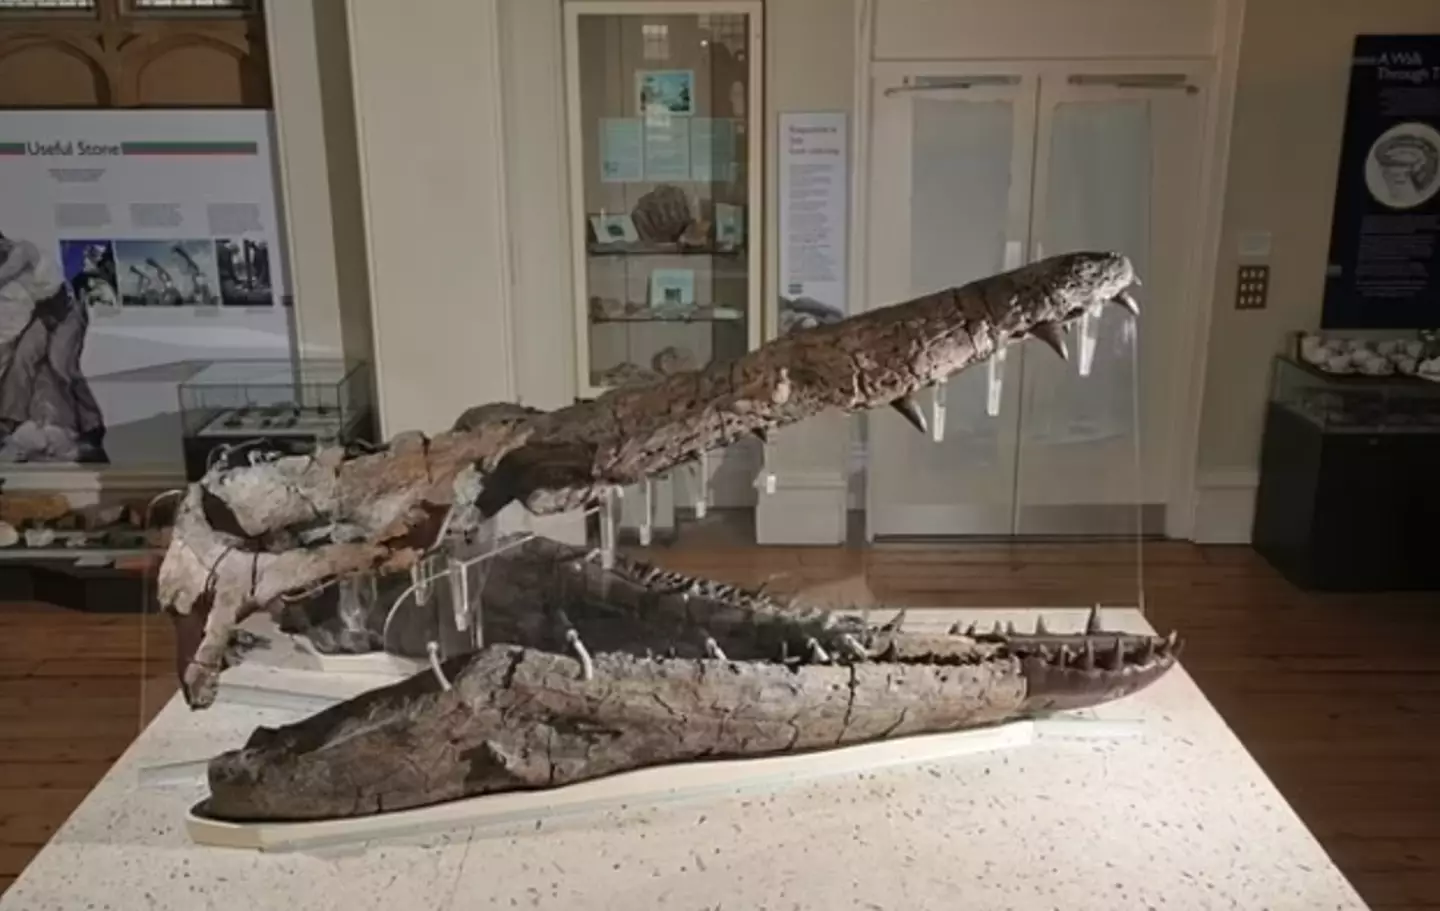 "This enormous prehistoric marine reptile ruled the seas at the same time dinosaurs reigned on land, 150 million years ago."